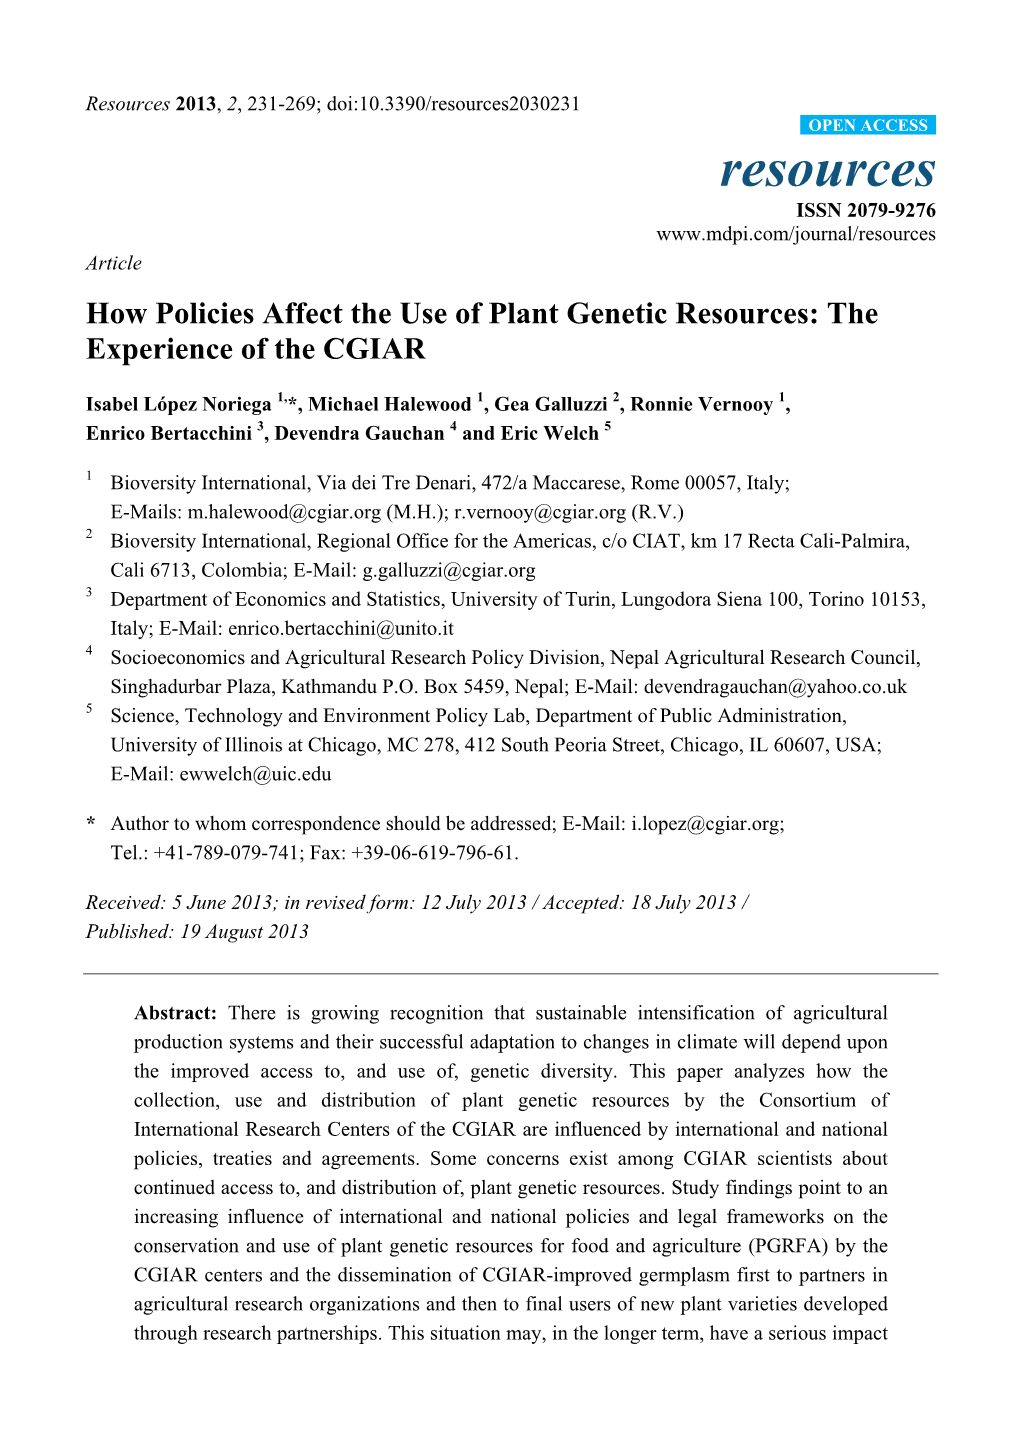 How Policies Affect the Use of Plant Genetic Resources: the Experience of the CGIAR